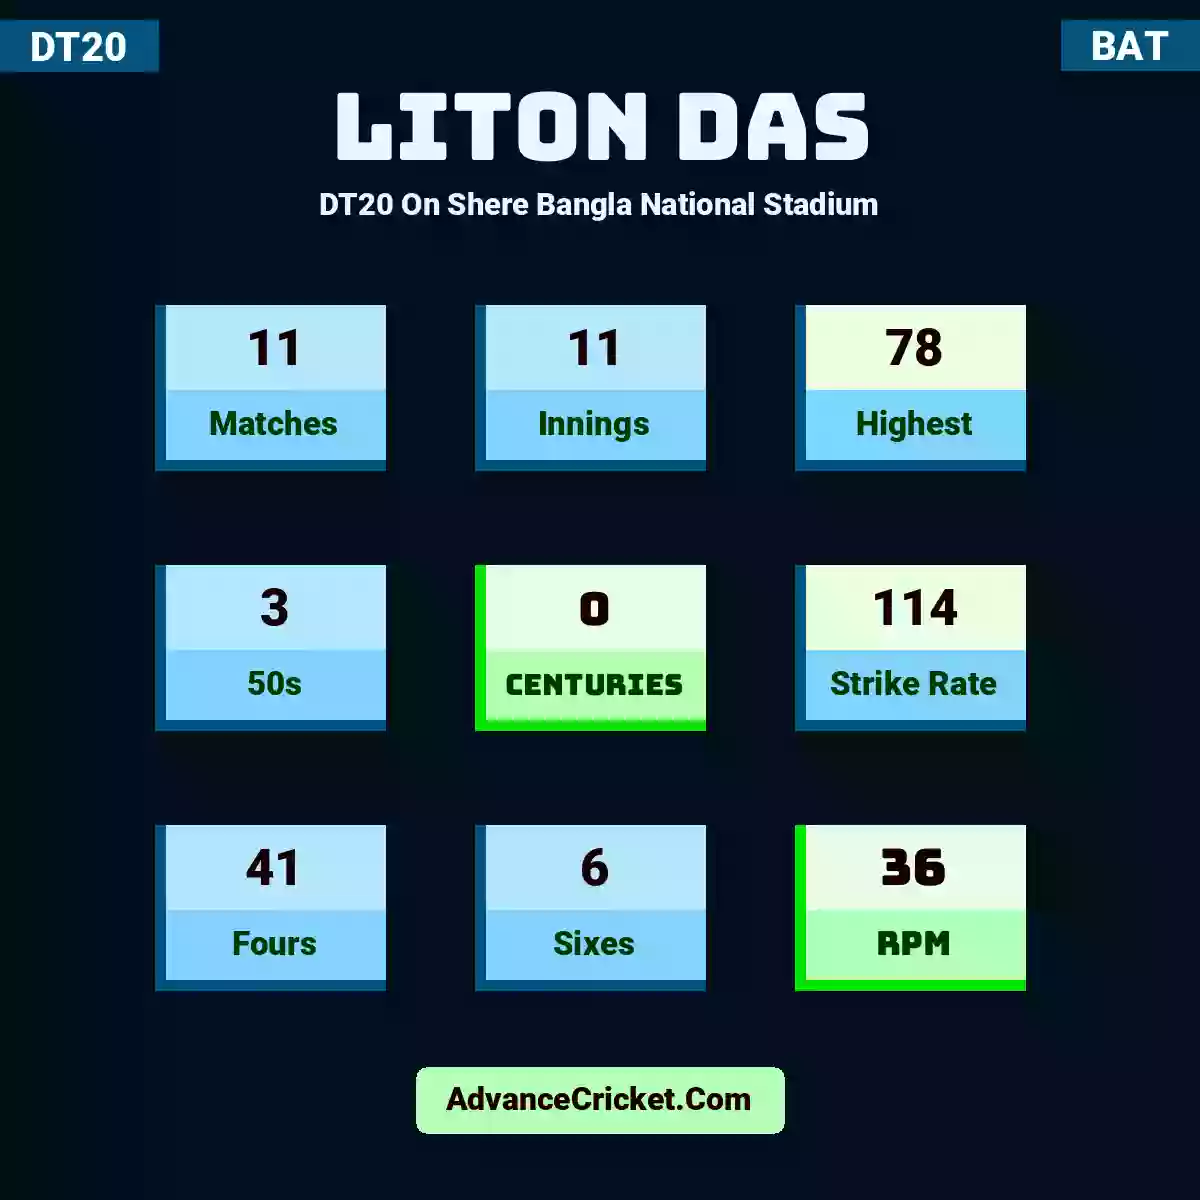 Liton Das DT20  On Shere Bangla National Stadium, Liton Das played 11 matches, scored 78 runs as highest, 3 half-centuries, and 0 centuries, with a strike rate of 114. L.Das hit 41 fours and 6 sixes, with an RPM of 36.